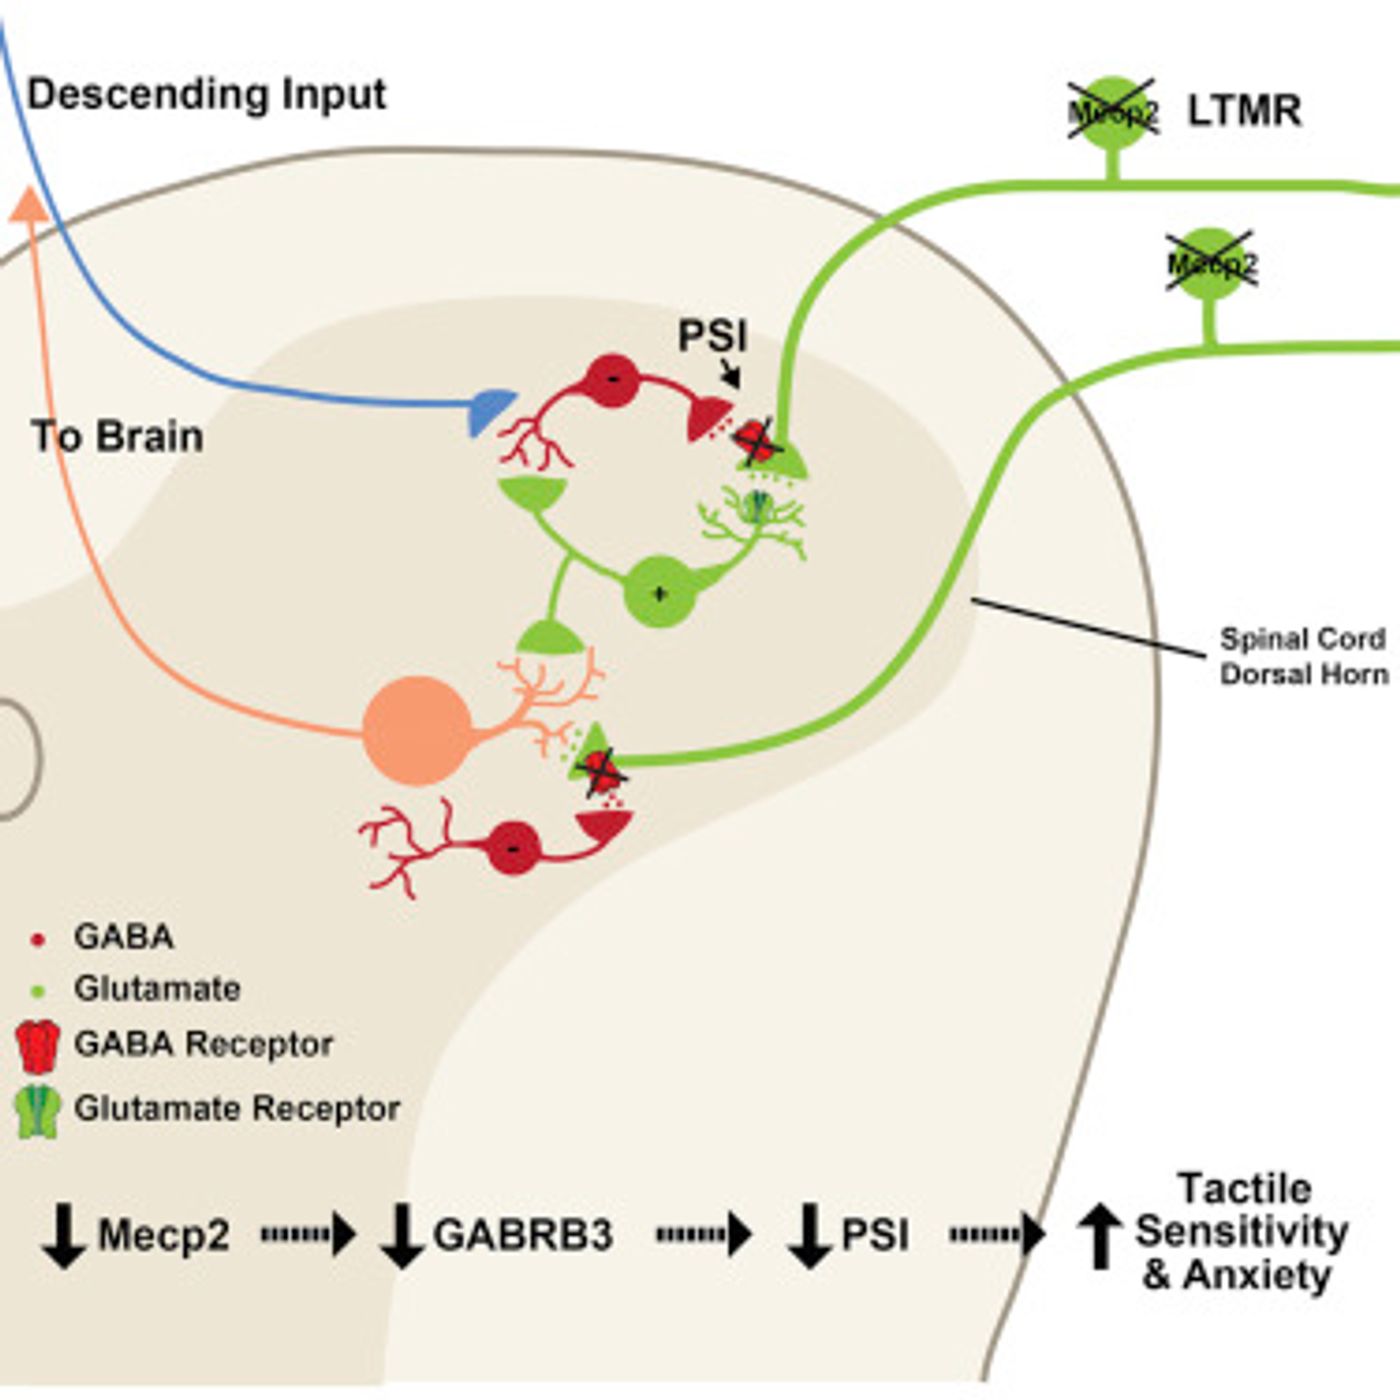 The proposed mechanism from the study is shown: Removal of Mecp2 or Gabrb3 in peripheral somatosensory neurons results in mechanosensory dysfunction through loss of GABAA receptor-mediated presynaptic inhibition of inputs to the CNS. Image: Cell Press